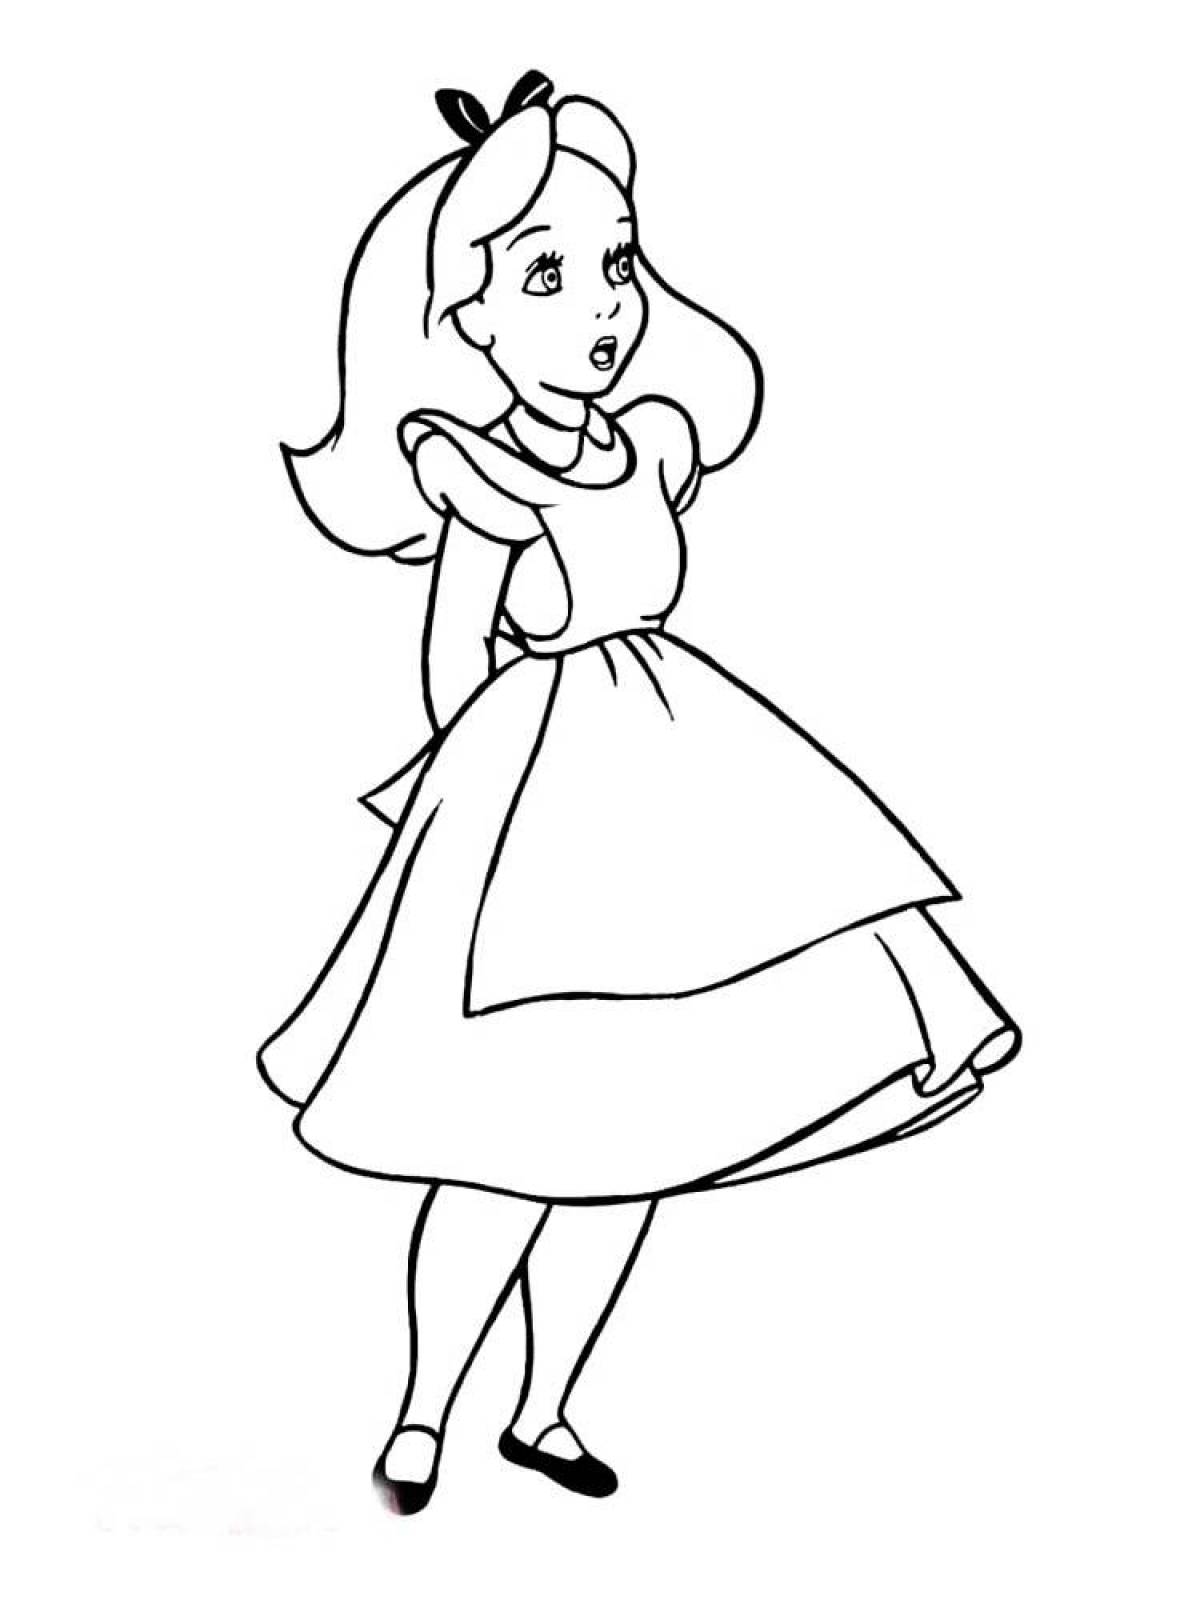 Adorable alice find coloring page